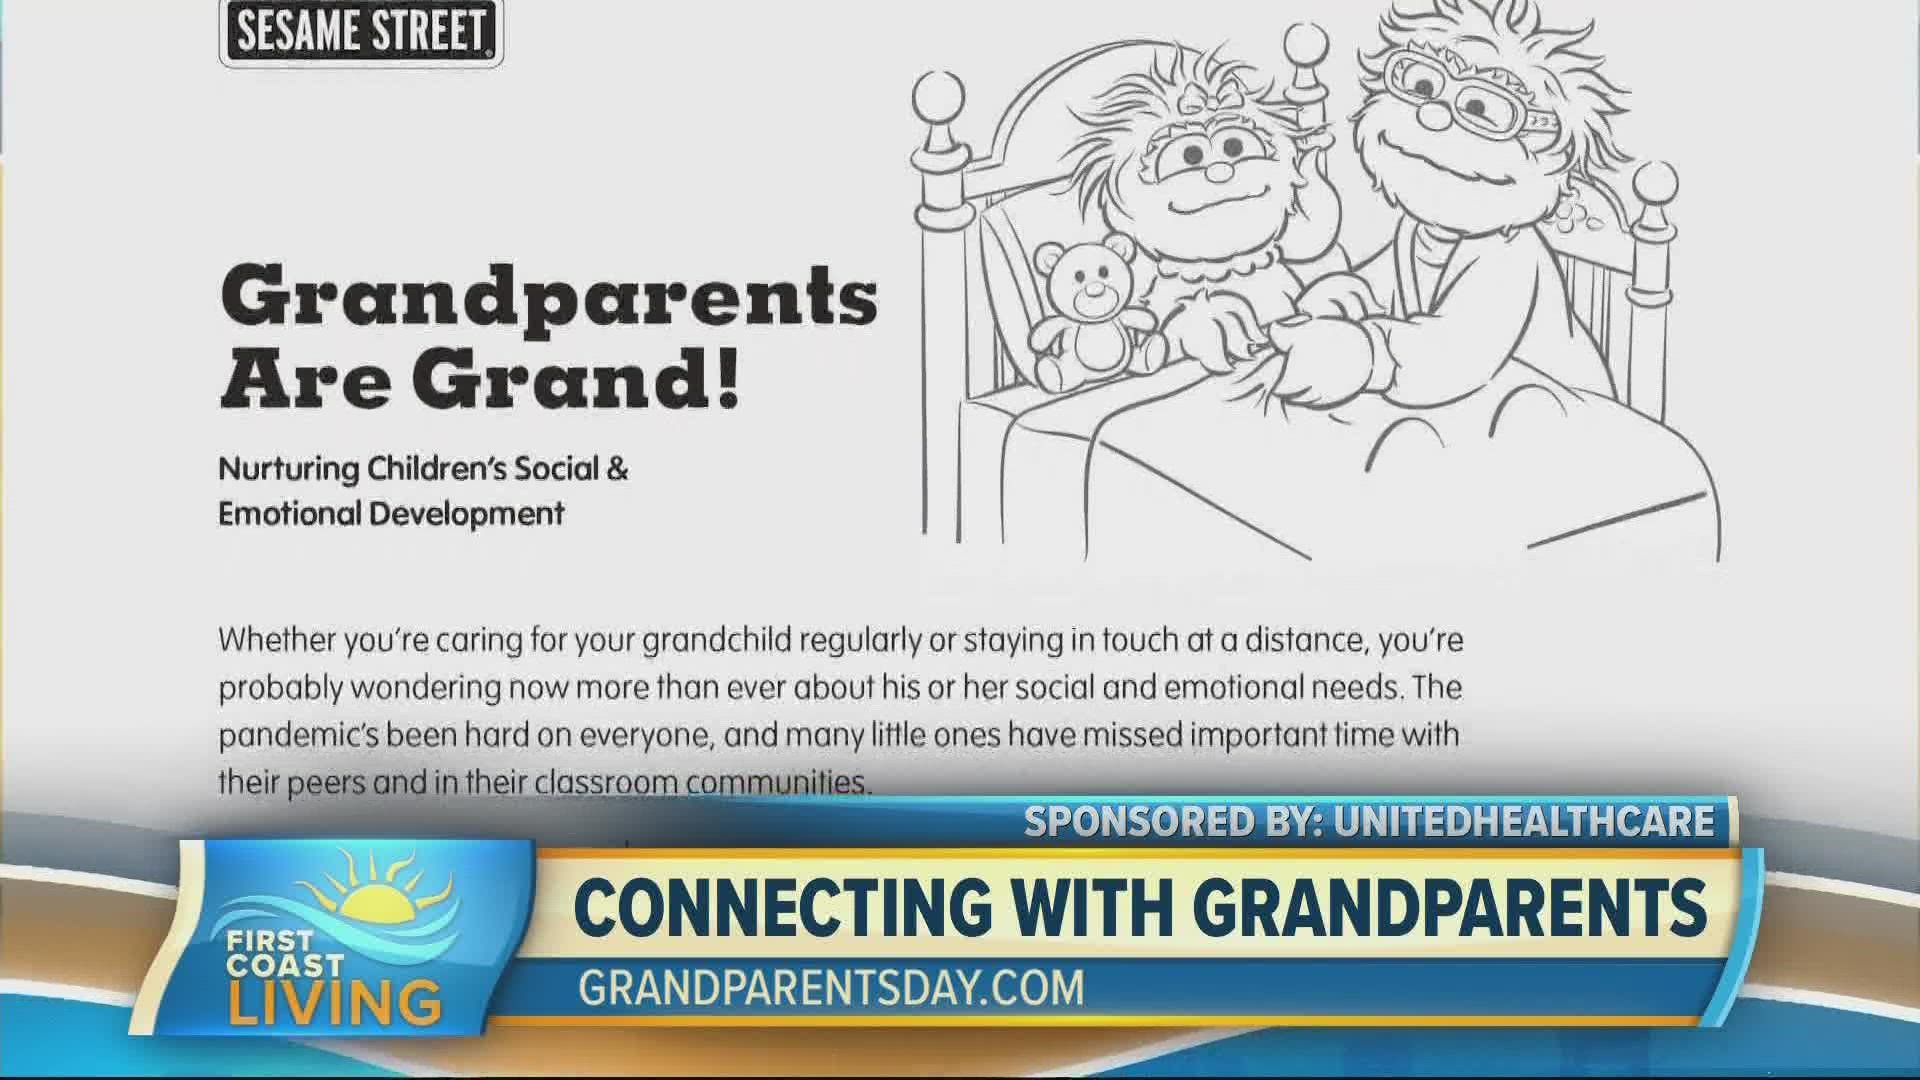 UnitedHealthcare has collaborated with Sesame Workshop on fun ways to celebrate grandparents.